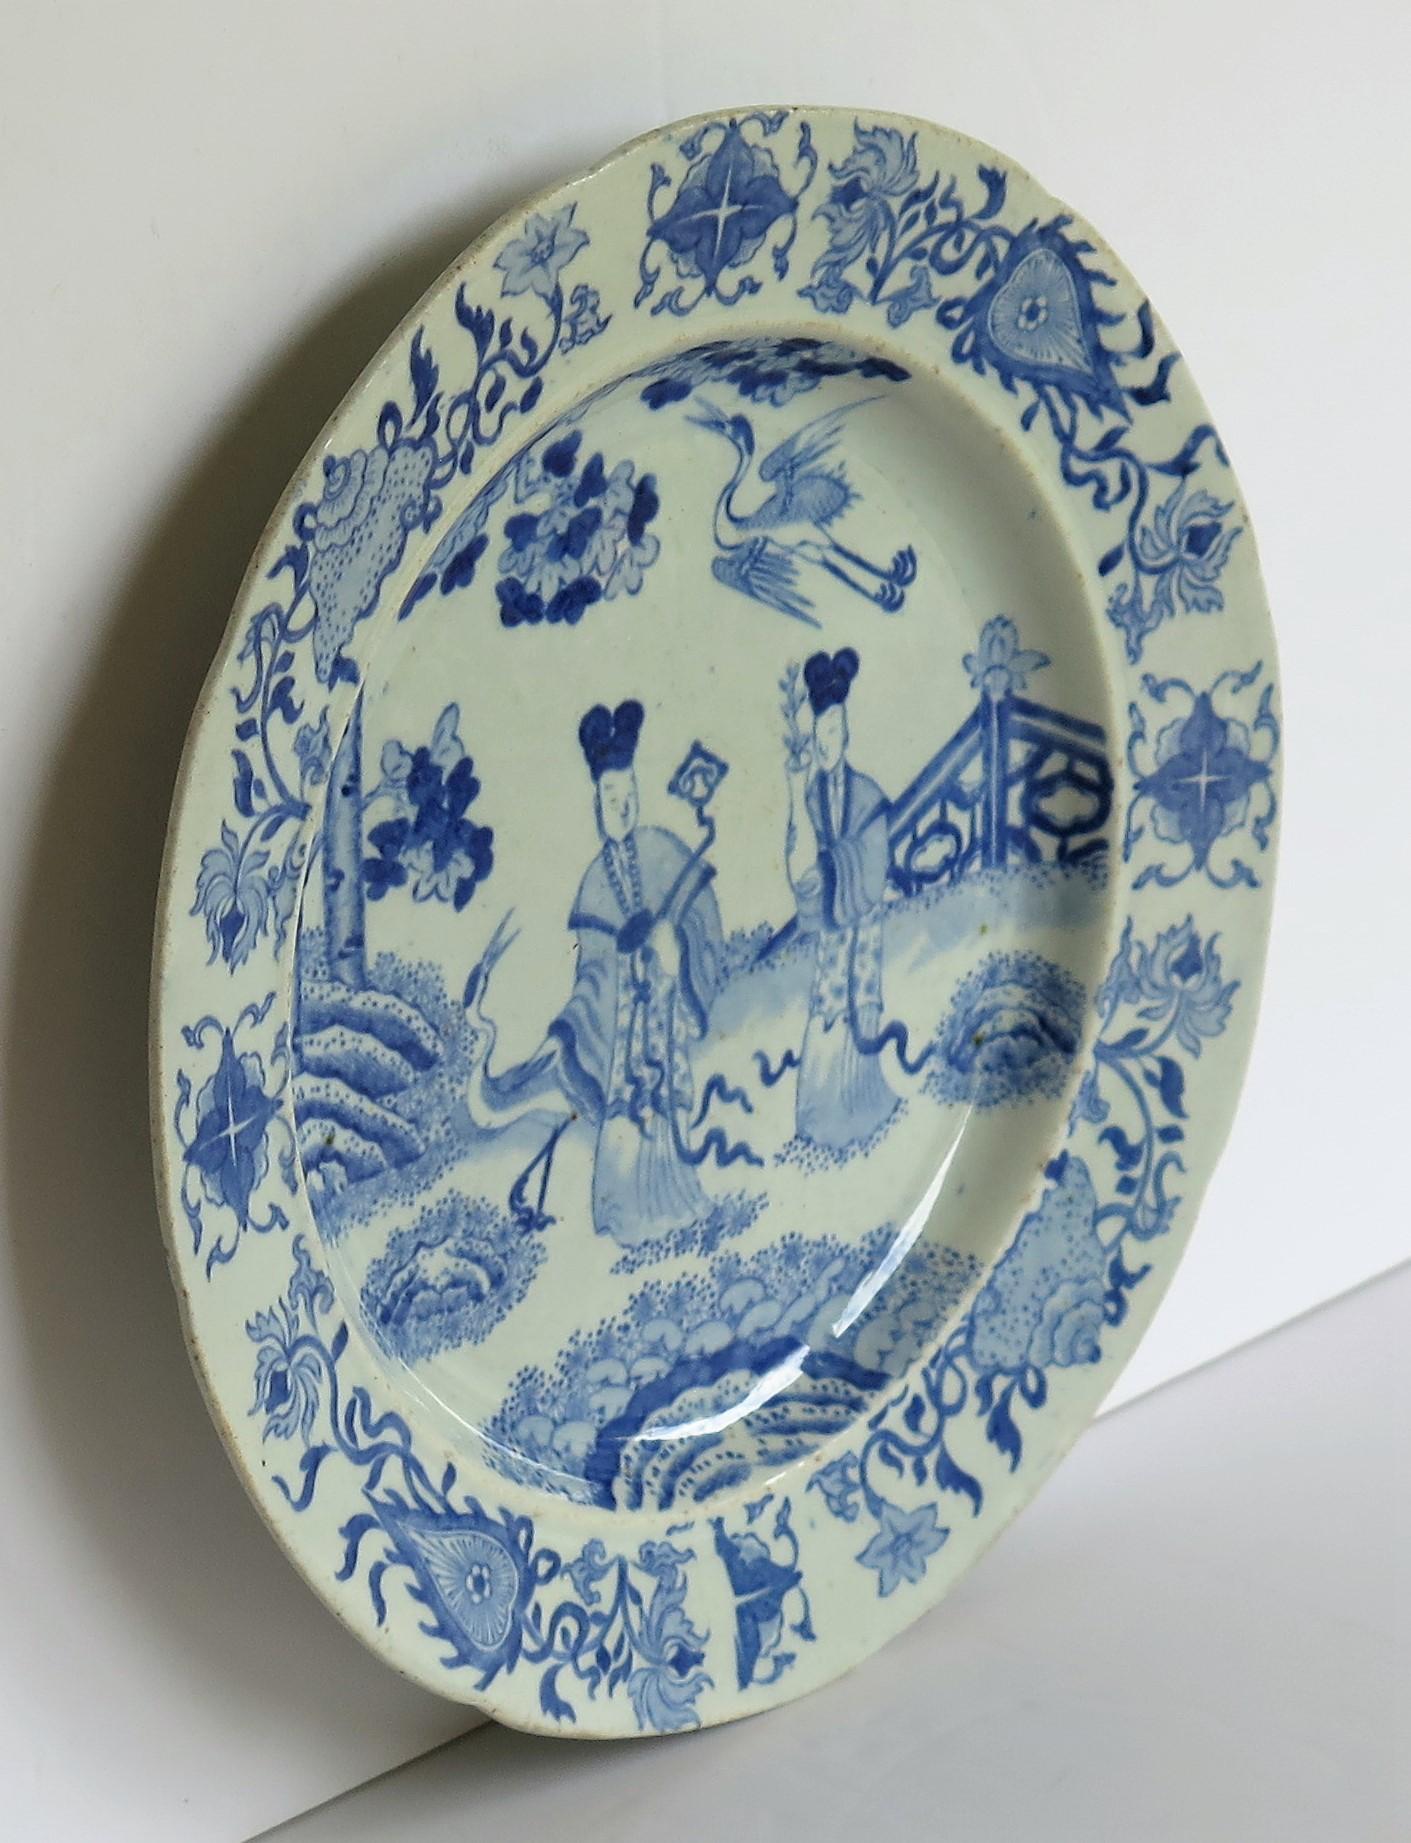 This ironstone pottery dinner plate was made by the Mason's factory at Lane Delph, Staffordshire, England and is decorated in the blue and white Chinese ladies with cranes which is a rare pattern, fully stamped and dating to the earliest period of